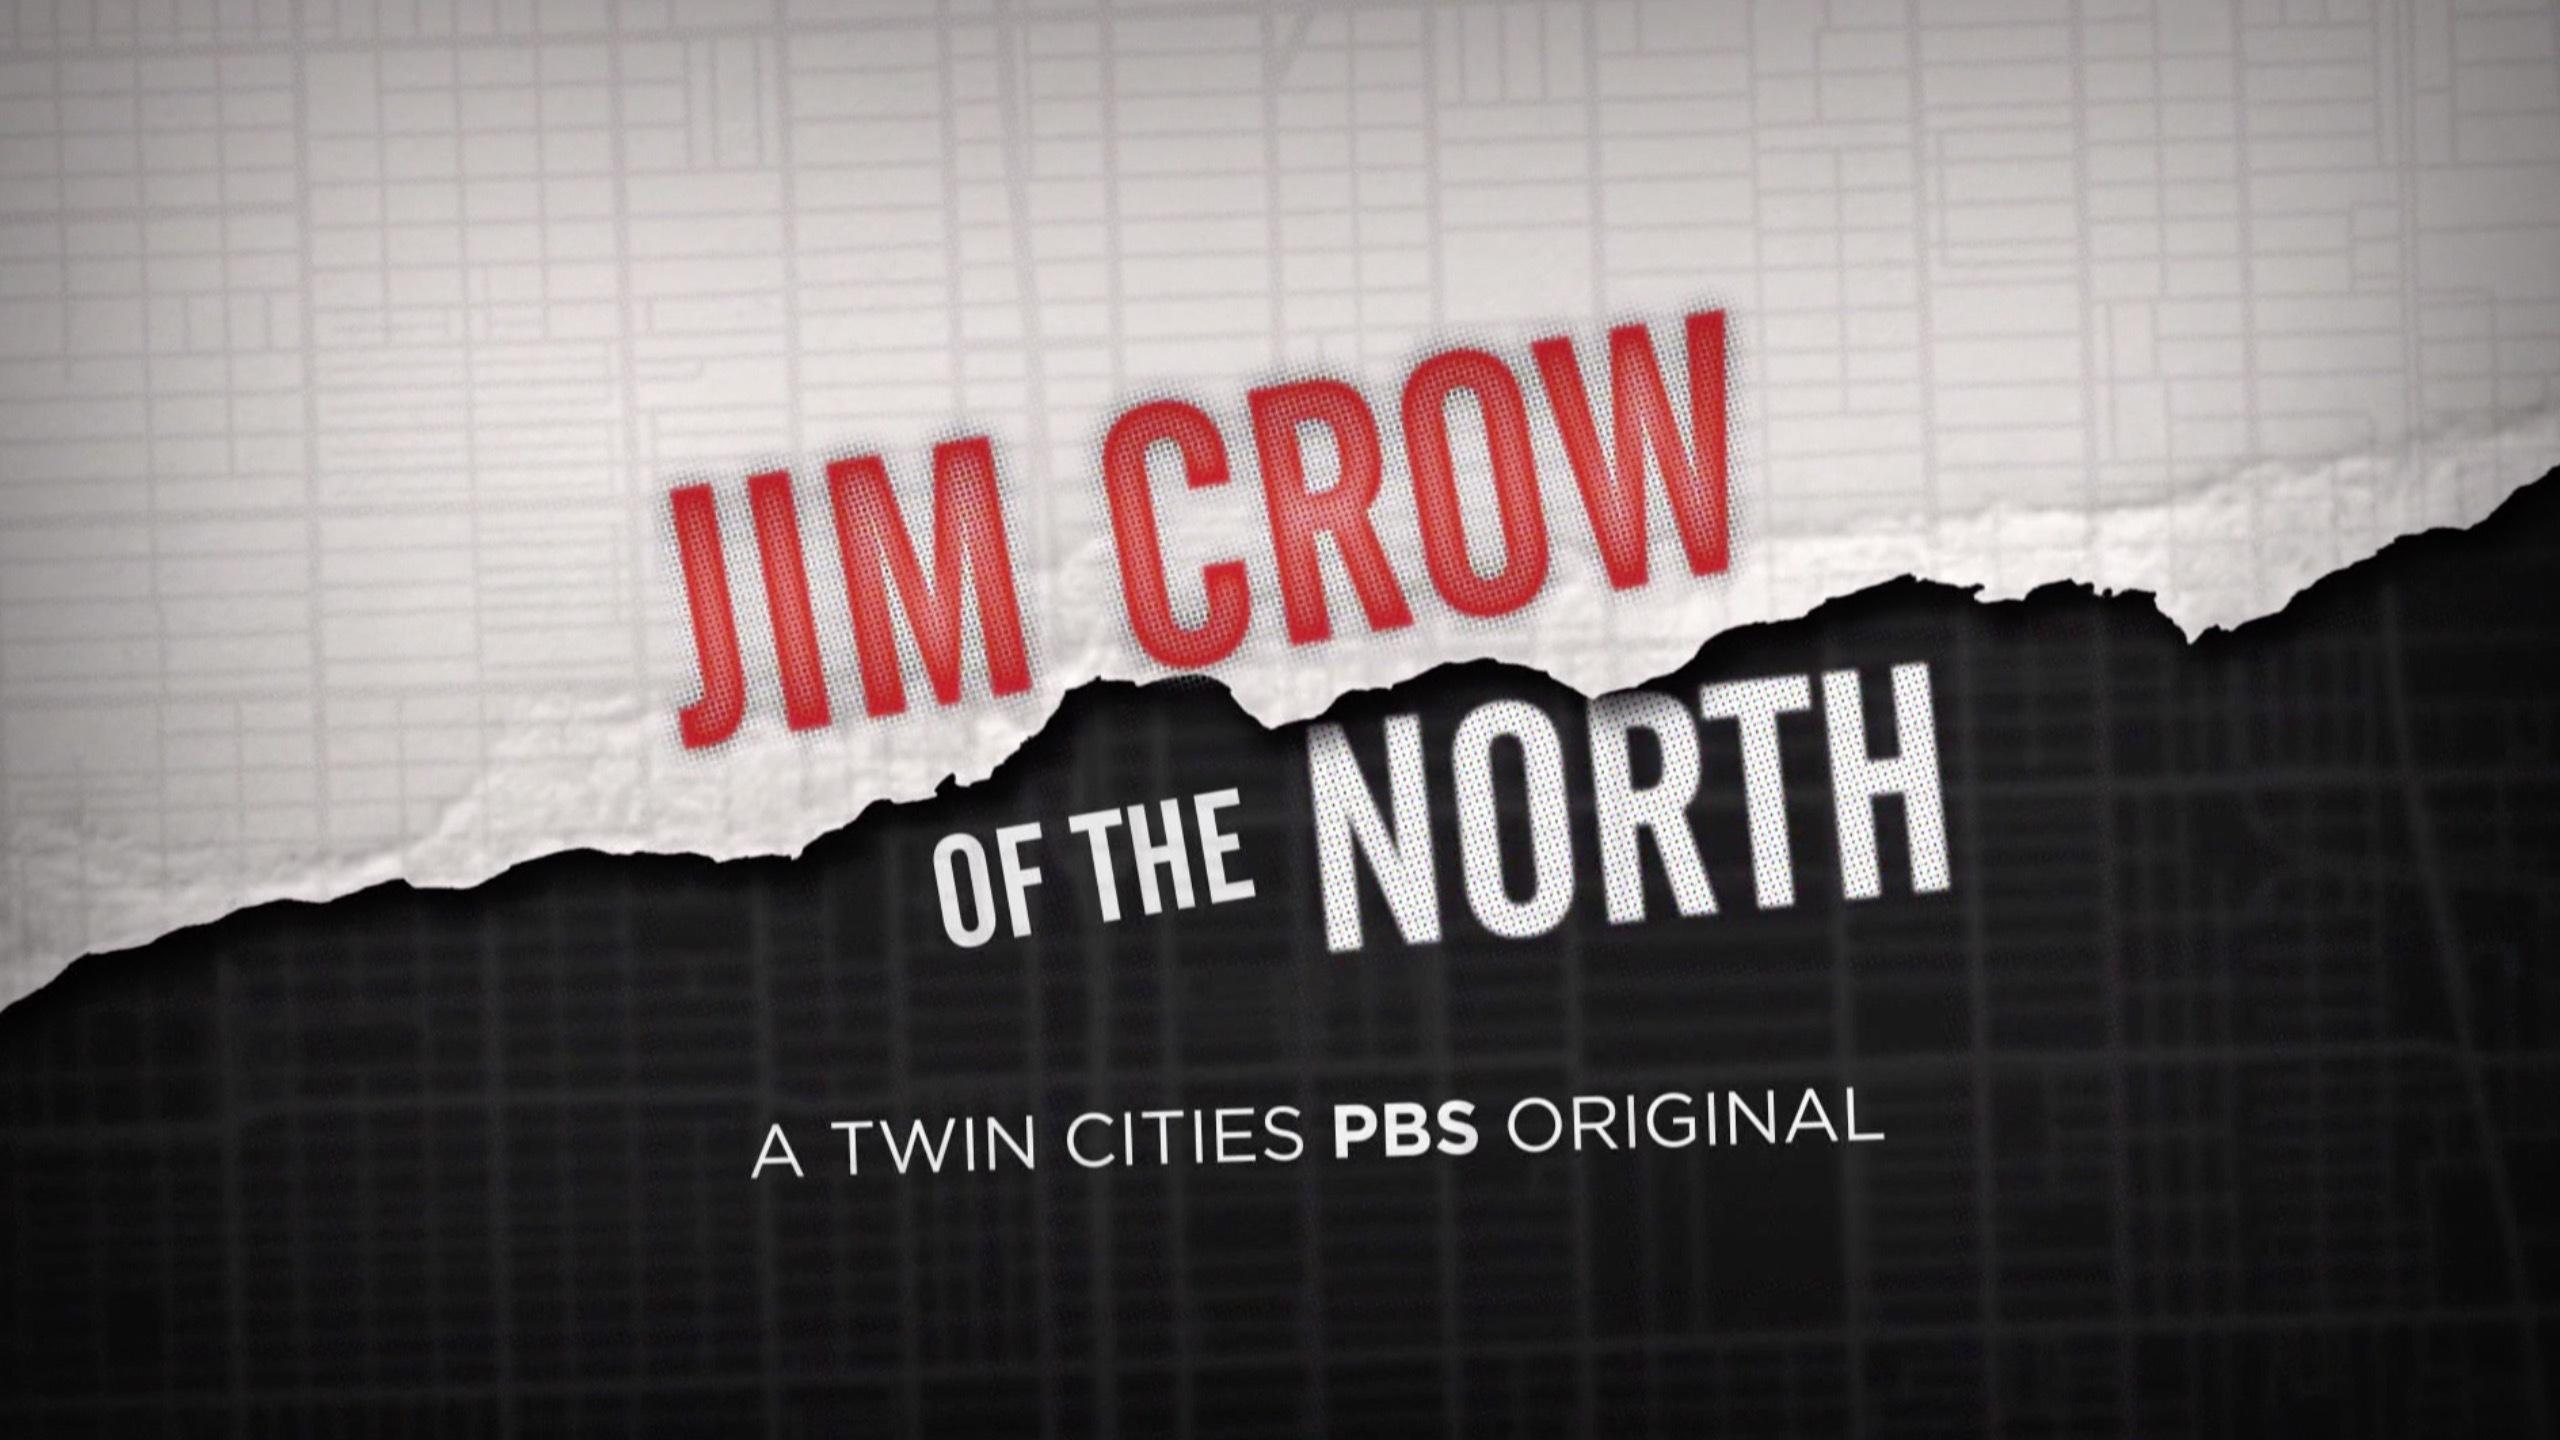 Event Promo Photo For Screening of TPT's Jim Crow of The North